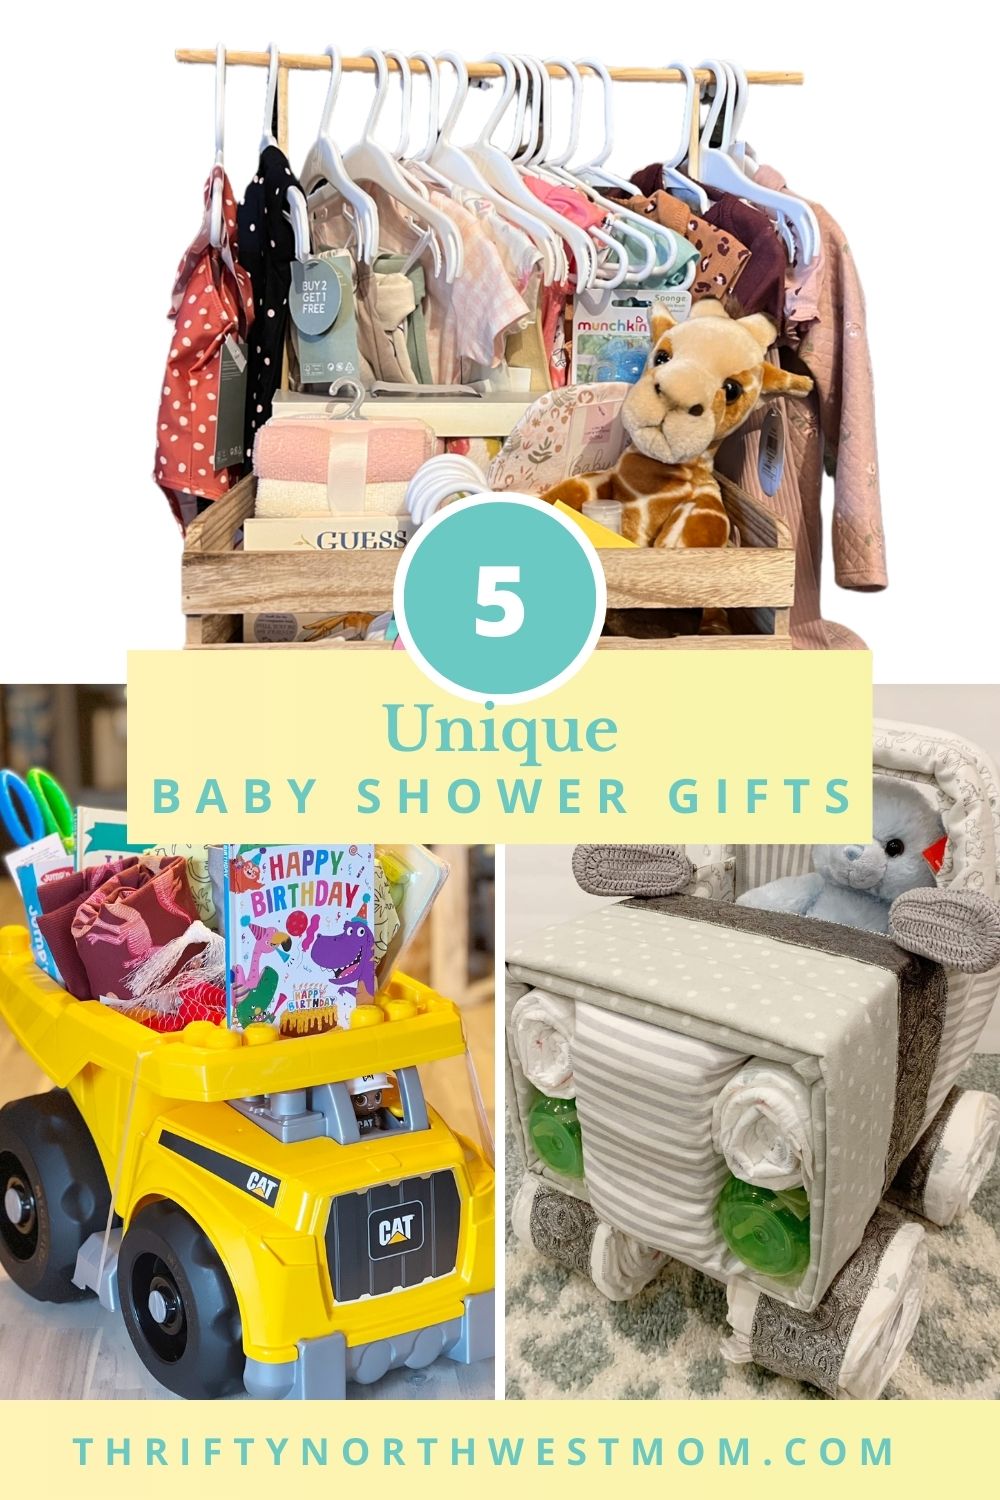 5 Unique Baby Shower Gifts - Fun To Make & Gift! - Thrifty NW Mom